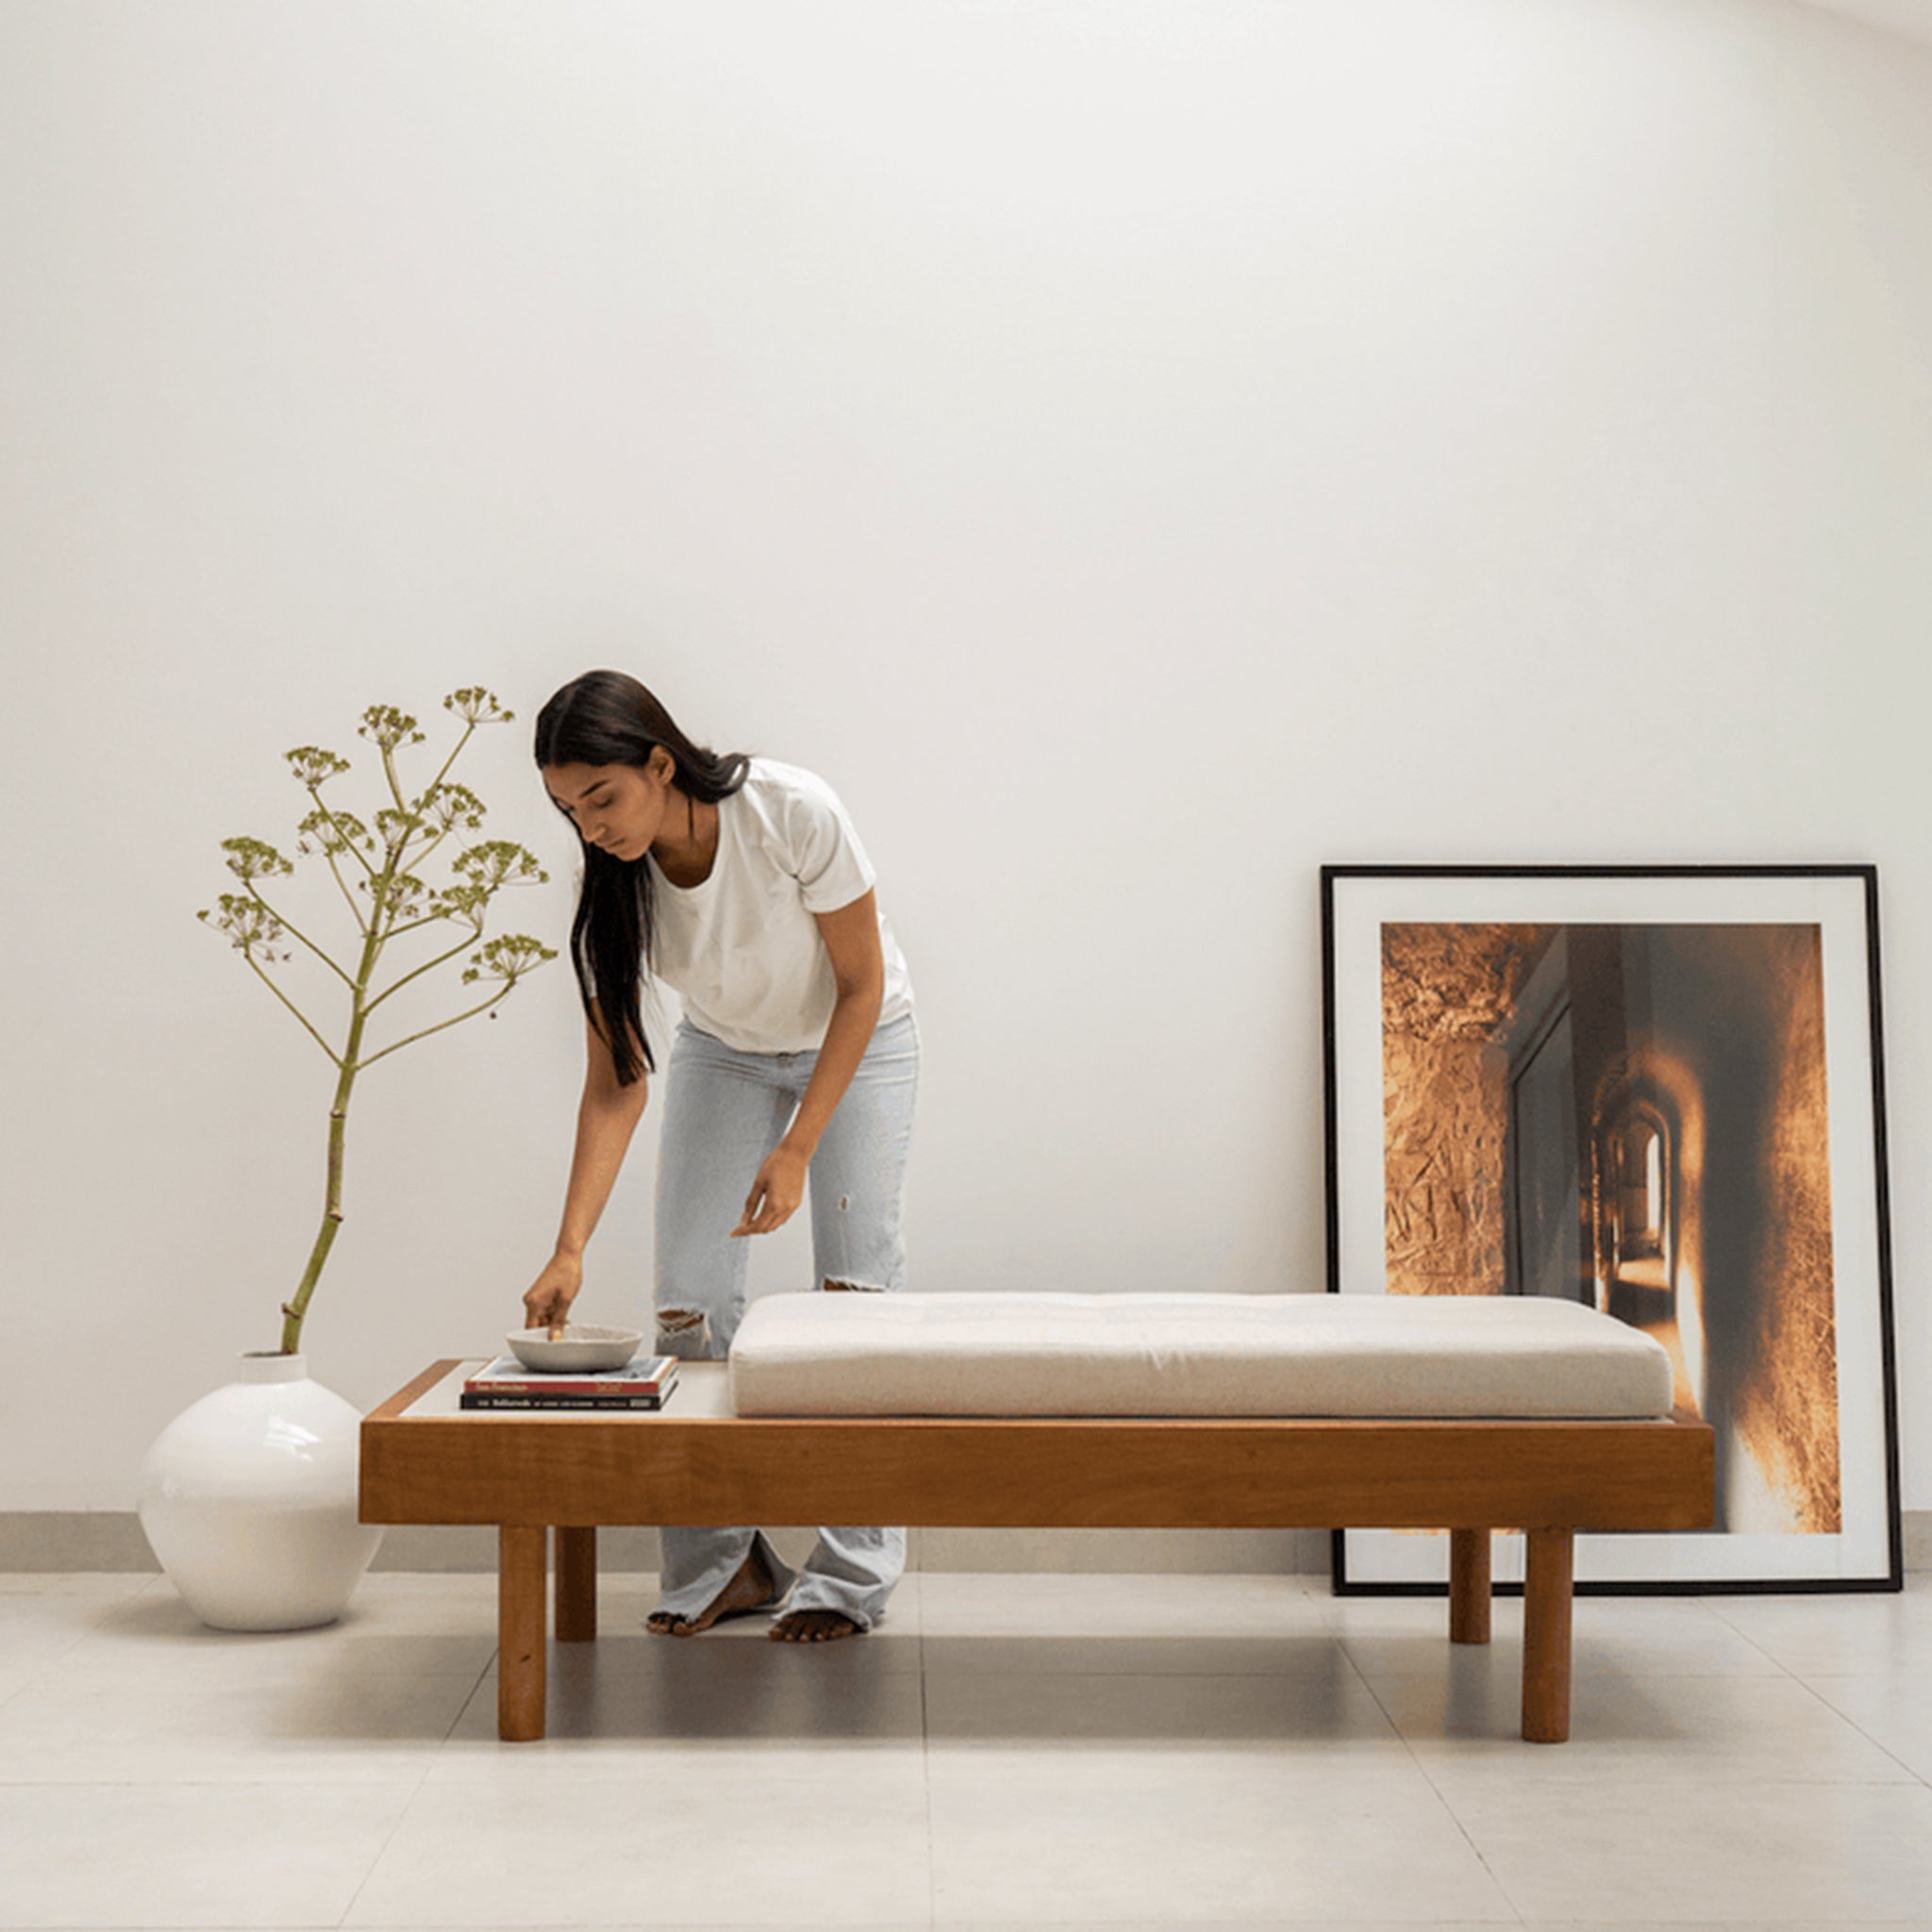 Woman arranging items on a modern wooden daybed with a customizable cushion and a side tray, in a minimalist room with a large vase and framed artwork